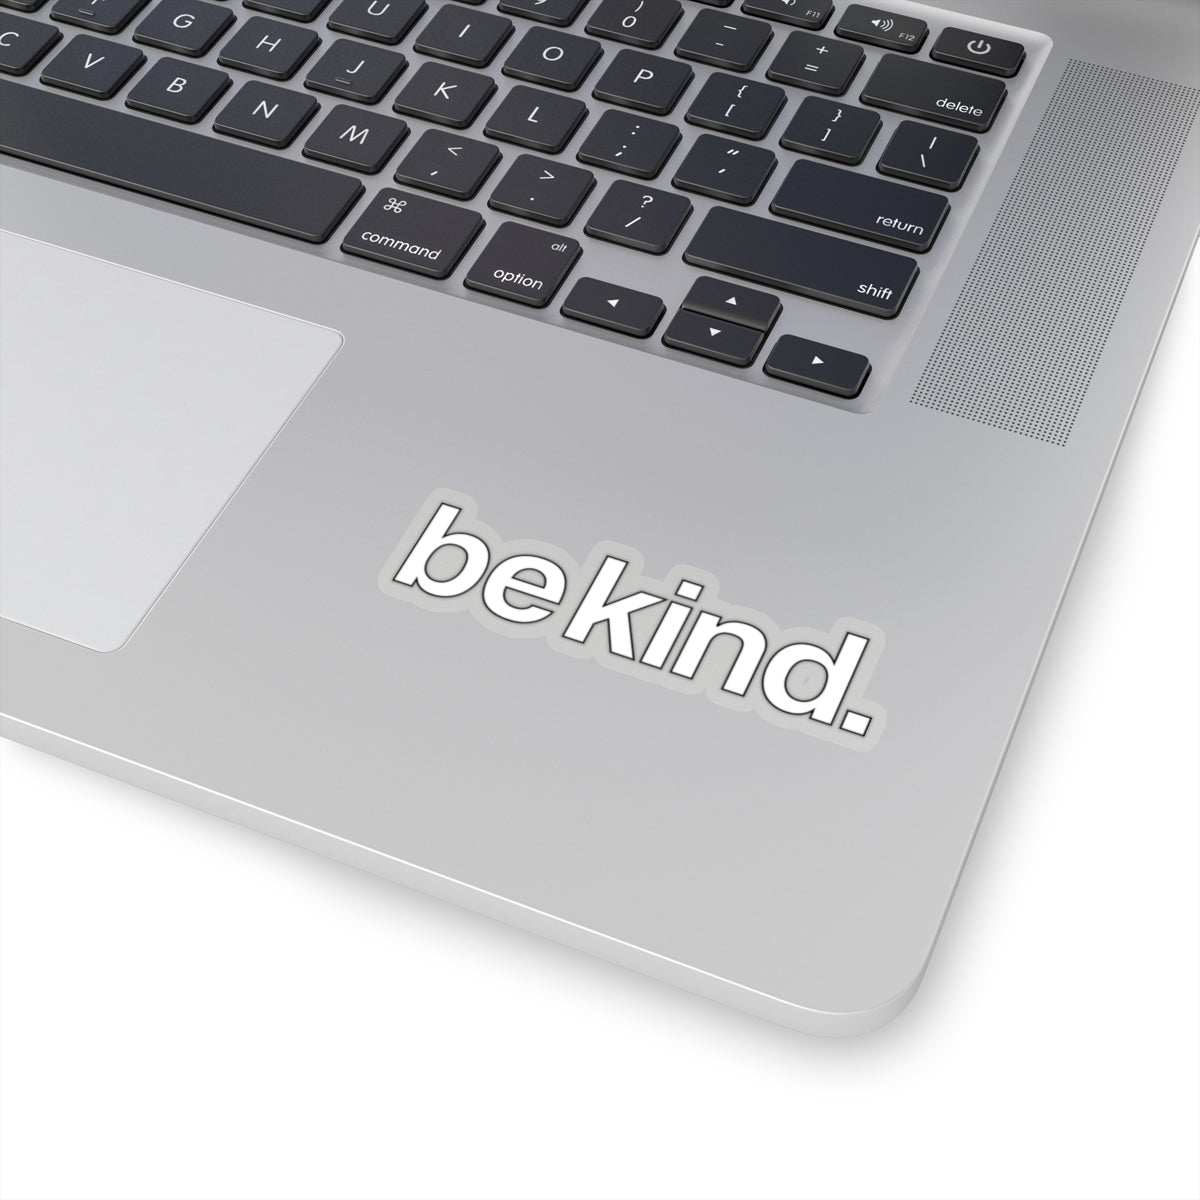 Be Kind Sticker, White Vinyl Decal, Bumper Sticker, Laptop Sign, Choose Kind, Bee Kind, Positive Kindness Kiss-Cut Stickers Starcove Fashion